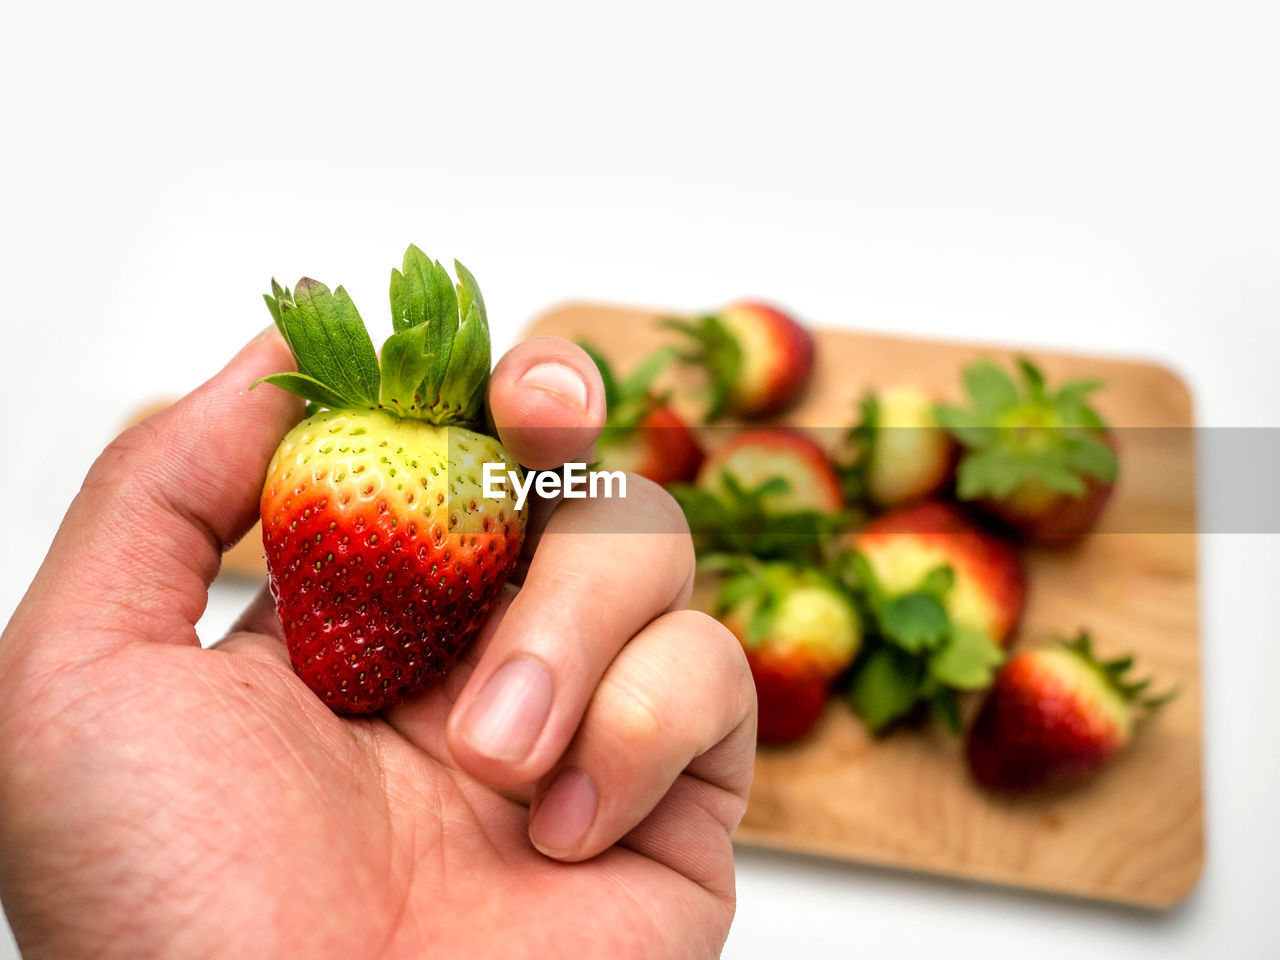 MIDSECTION OF PERSON HOLDING STRAWBERRIES